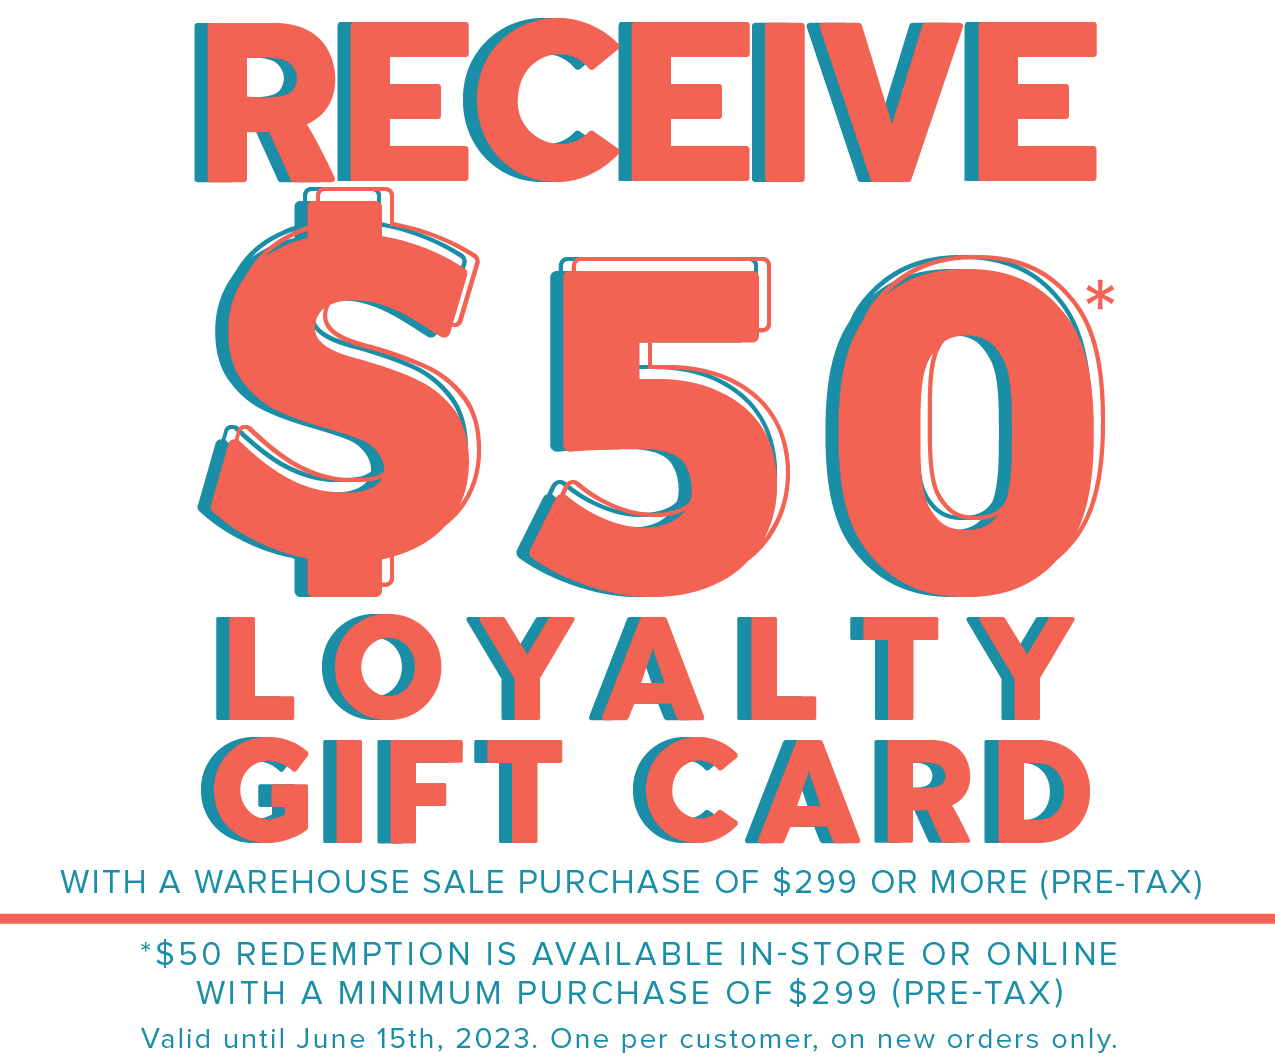 RECEIV I@ LOYALTY GIFT CARD WITH A WAREHOUSE SALE PURCHASE OF $299 OR MORE PRE-TAX *$50 REDEMPTION IS AVAILABLE IN-STORE OR ONLINE WITH A MINIMUM PURCHASE OF $299 PRE-TAX Valid until June 15th, 2023. One per customer, on new orders only. 